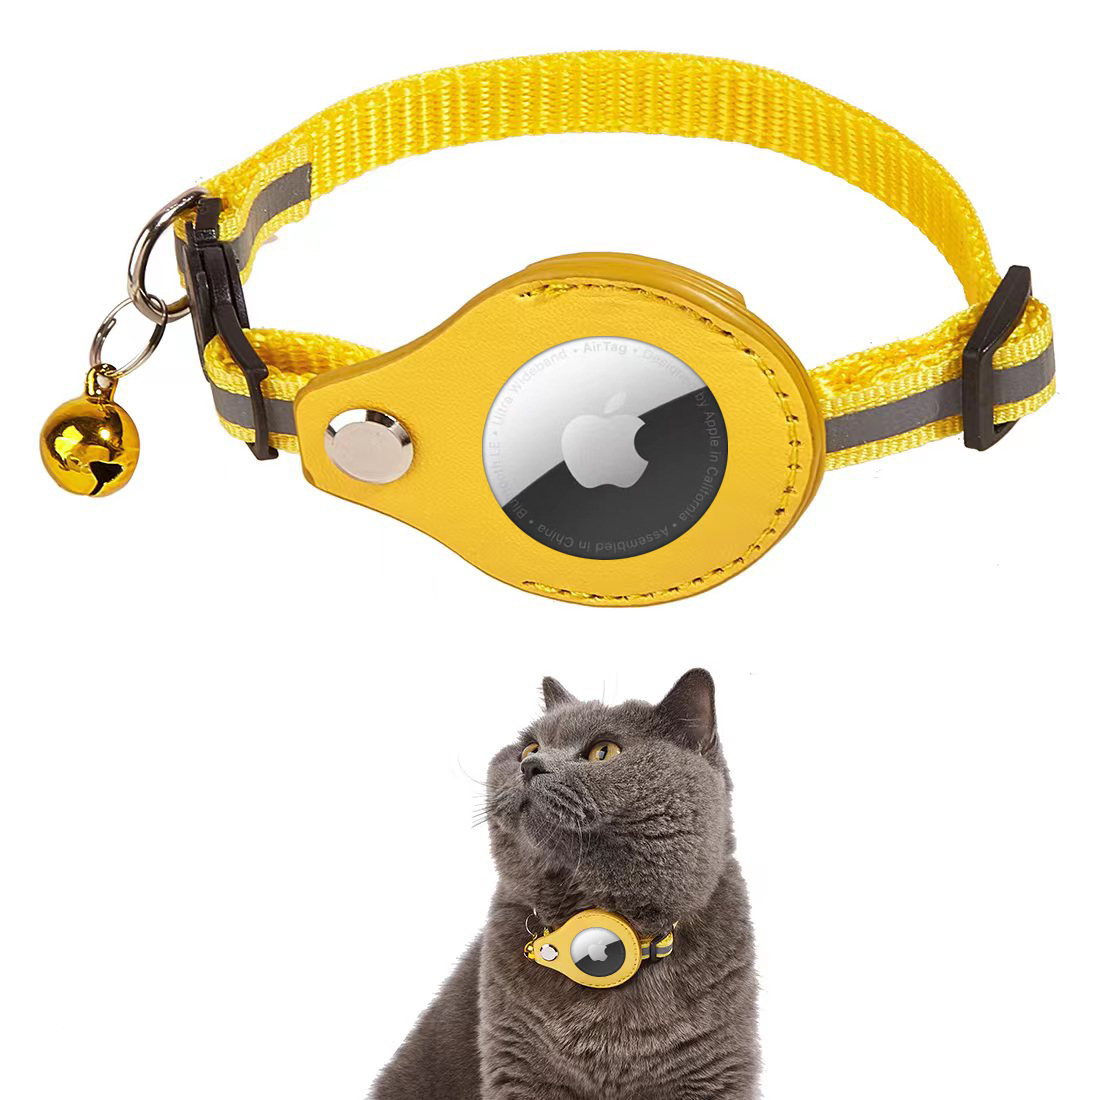 PSP-102 AirTag Reflective Pet Tracking Cat Collar